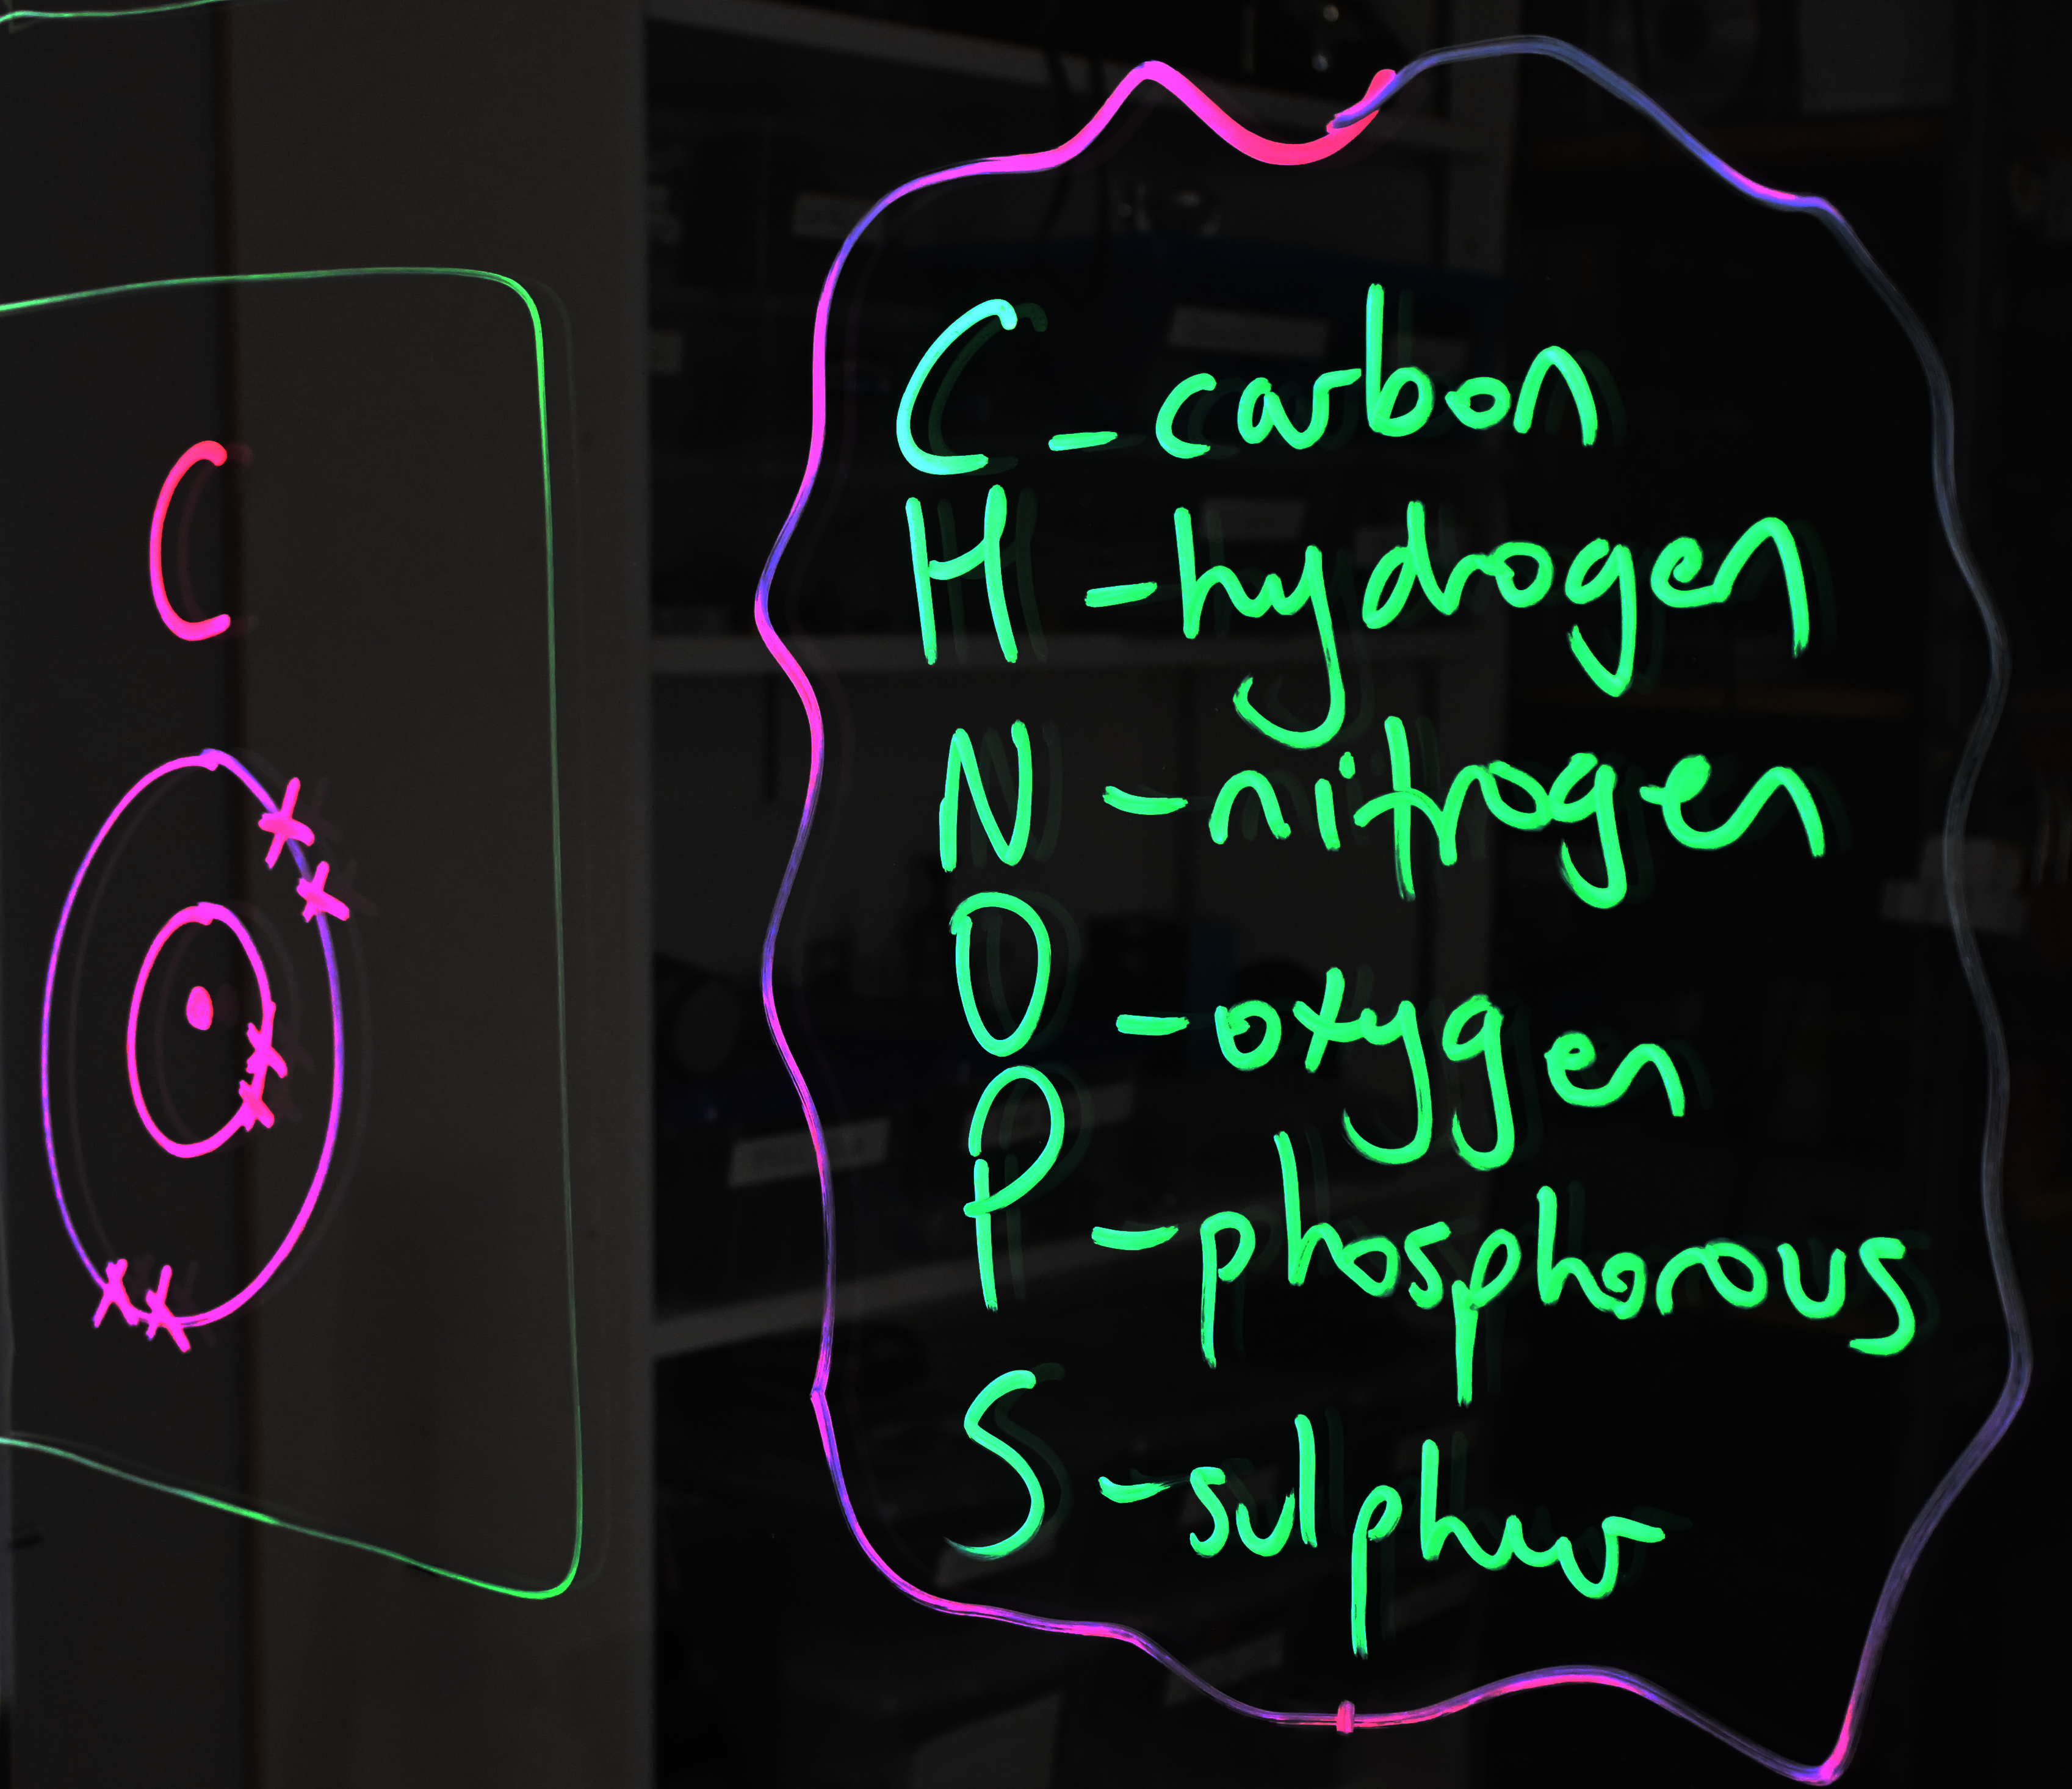 Writing on a light board shows a Bohr model of phosphorus lists the six elements that make up life. These elements are carbon, hydrogen, nitrogen, oxygen, phosphorus, and sulphur.